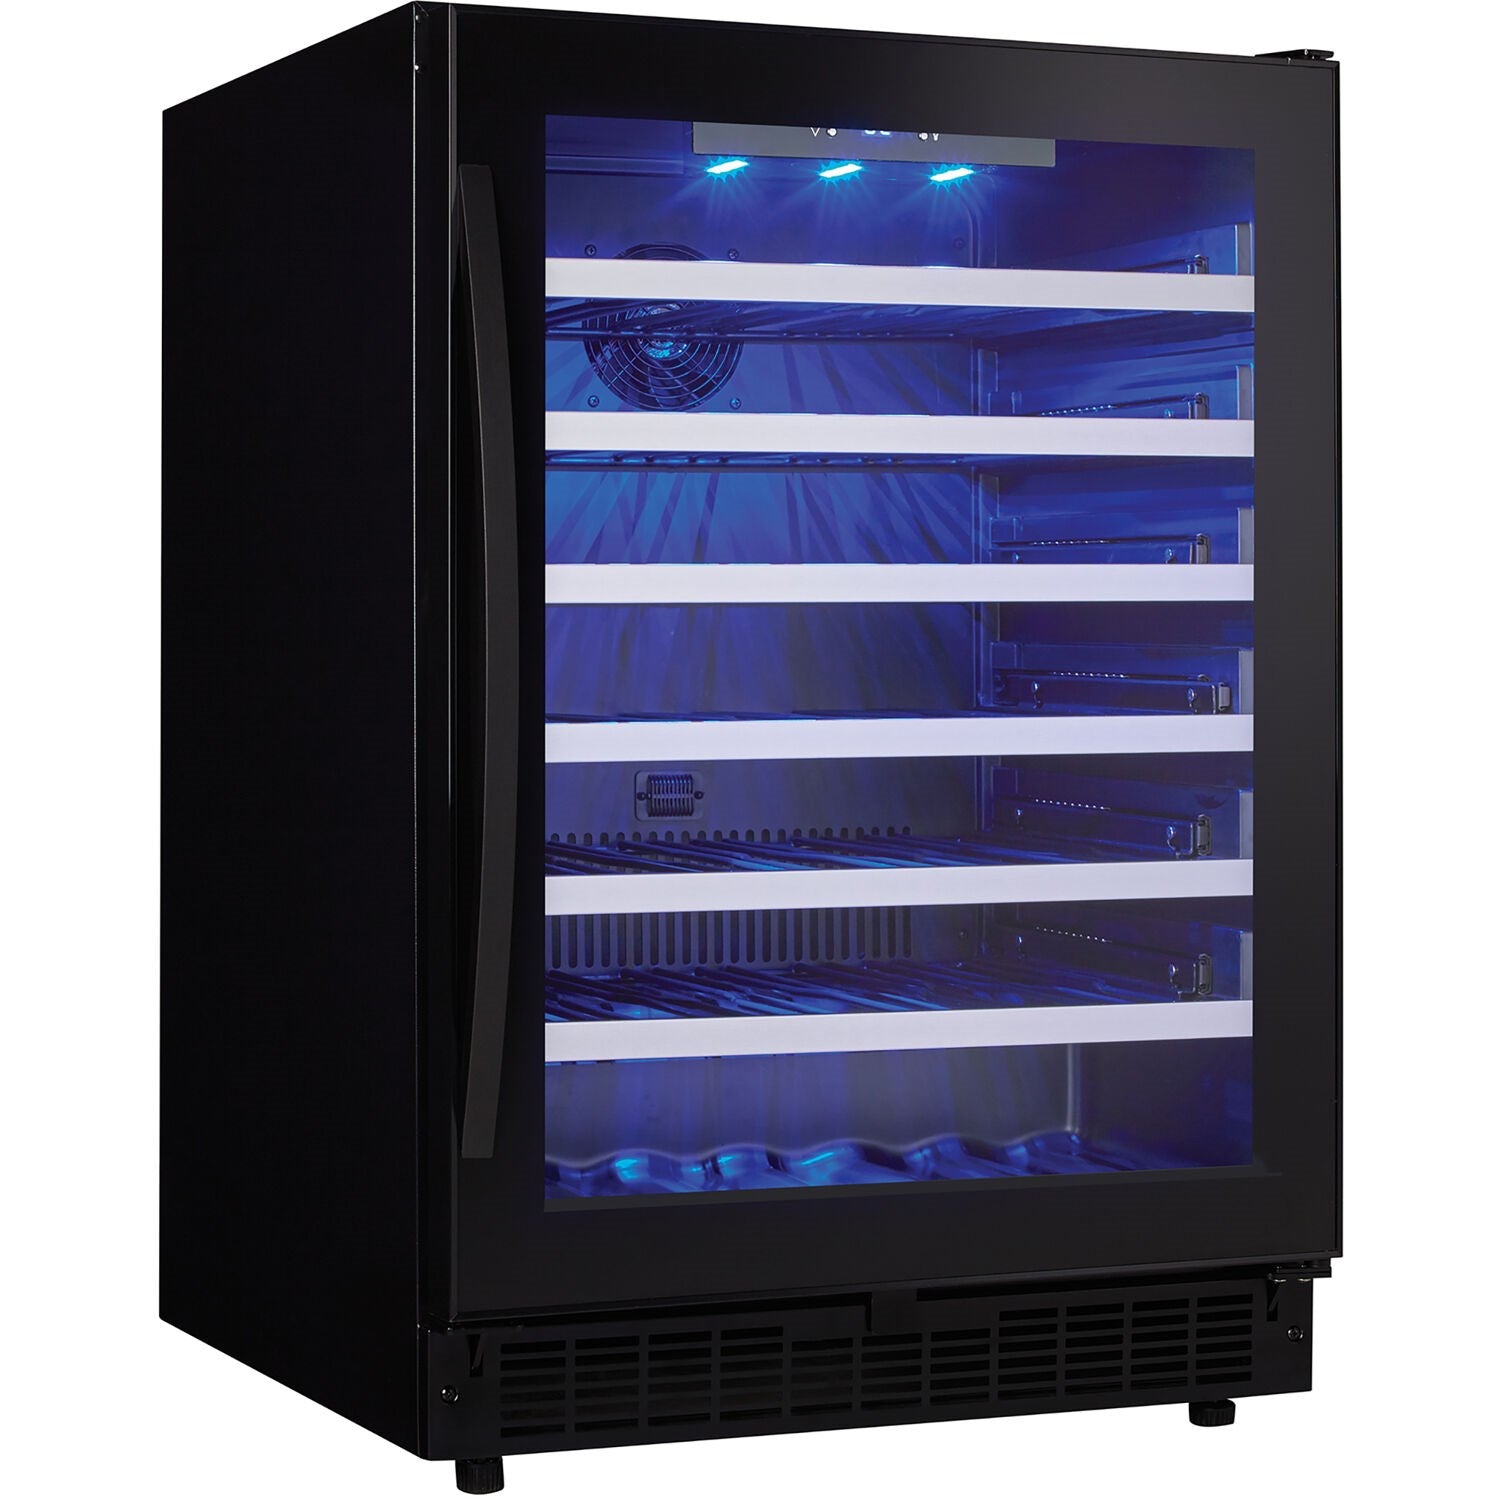 Danby - Silhouette Select Wine Cooler 48 Bottle, Single Tempeture Zone | SSWC056D1B-S